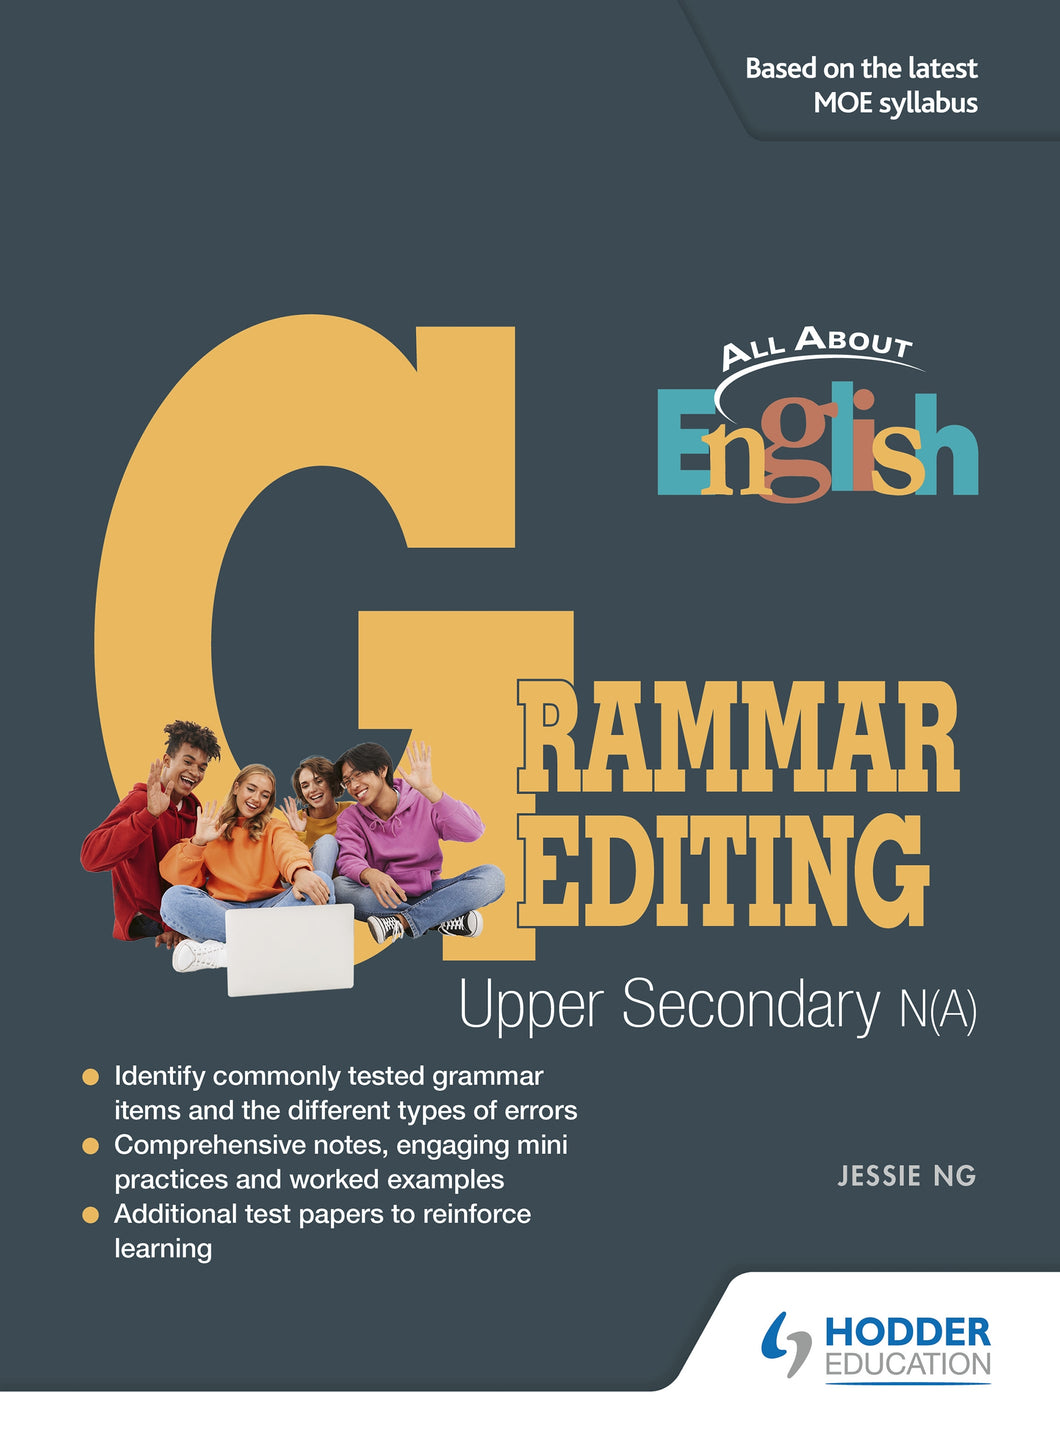 KRSS - English - All About English Grammar Editing Upper Sec. (Revised Edition) (NA)